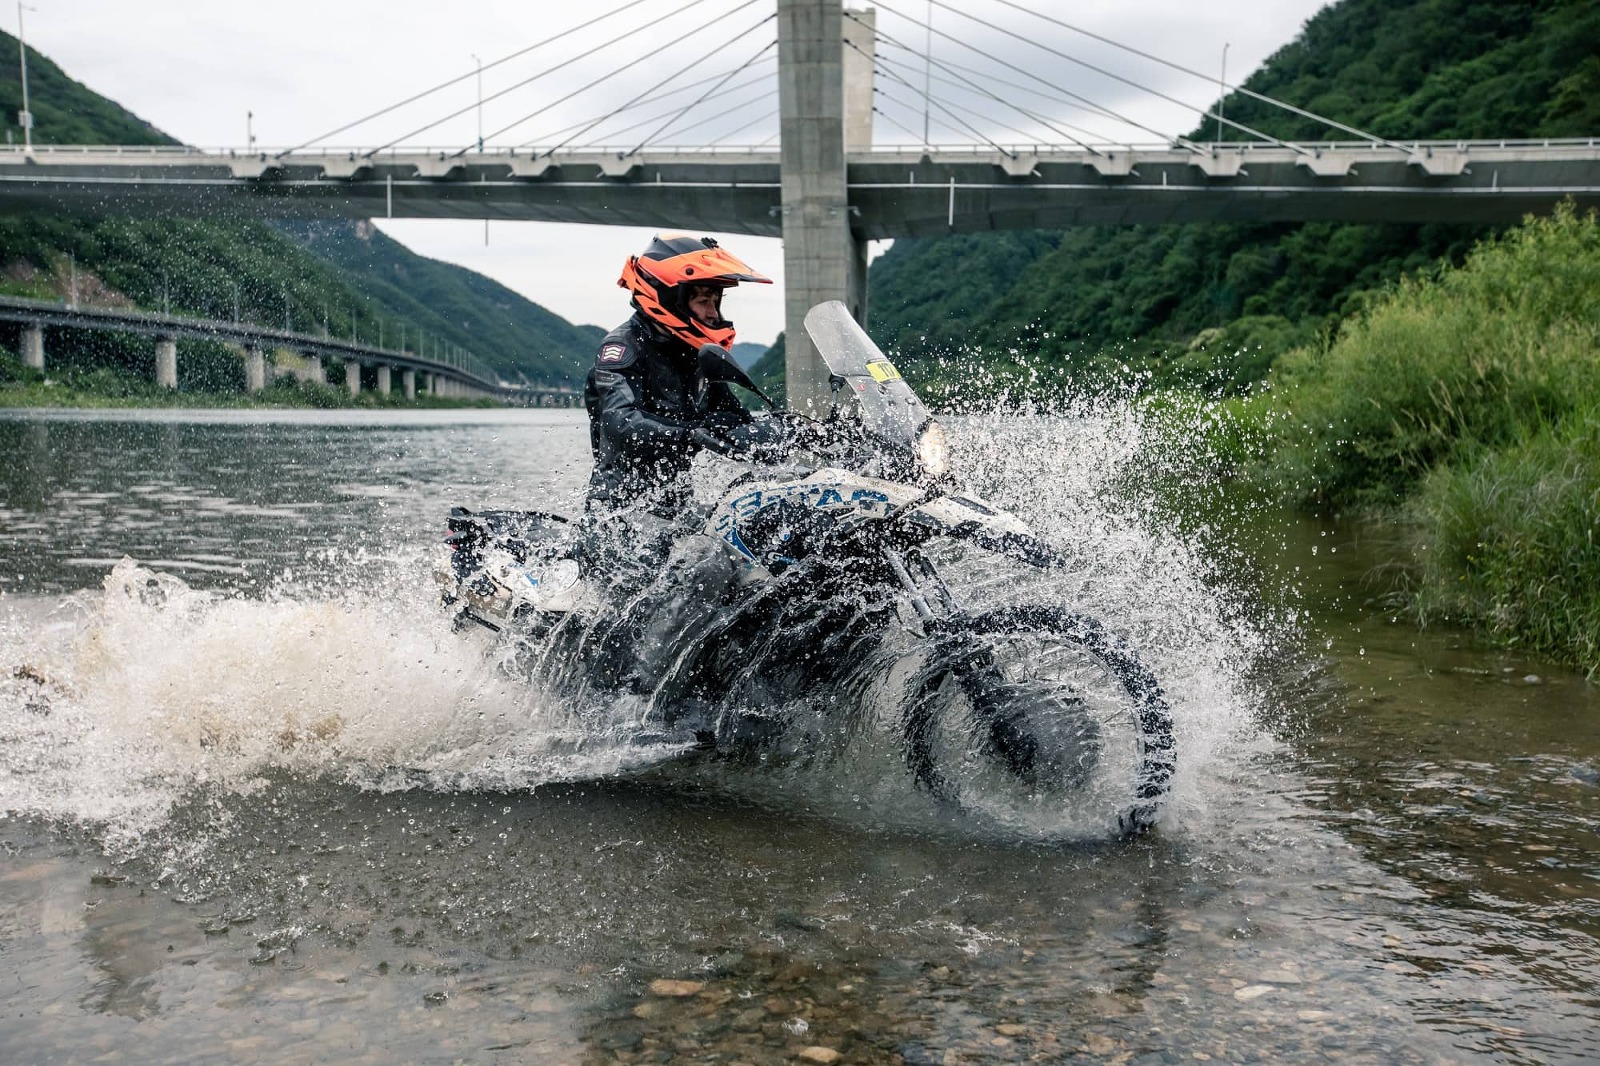 BMW Motorcycle Crossing River